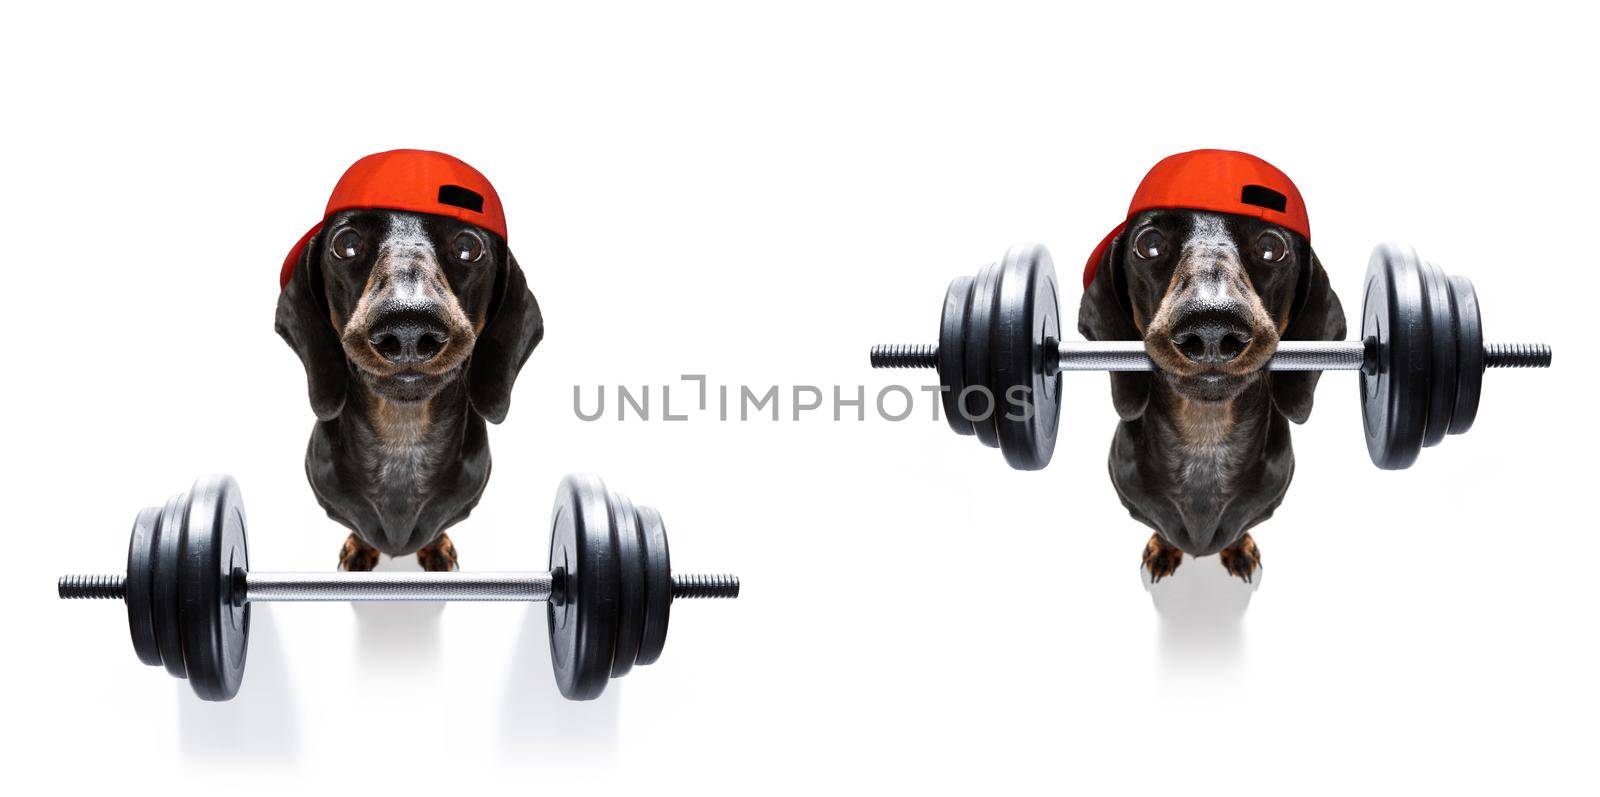 fitness sausage dachshund dog lifting a heavy big dumbbell, as personal trainer , isolated on white background